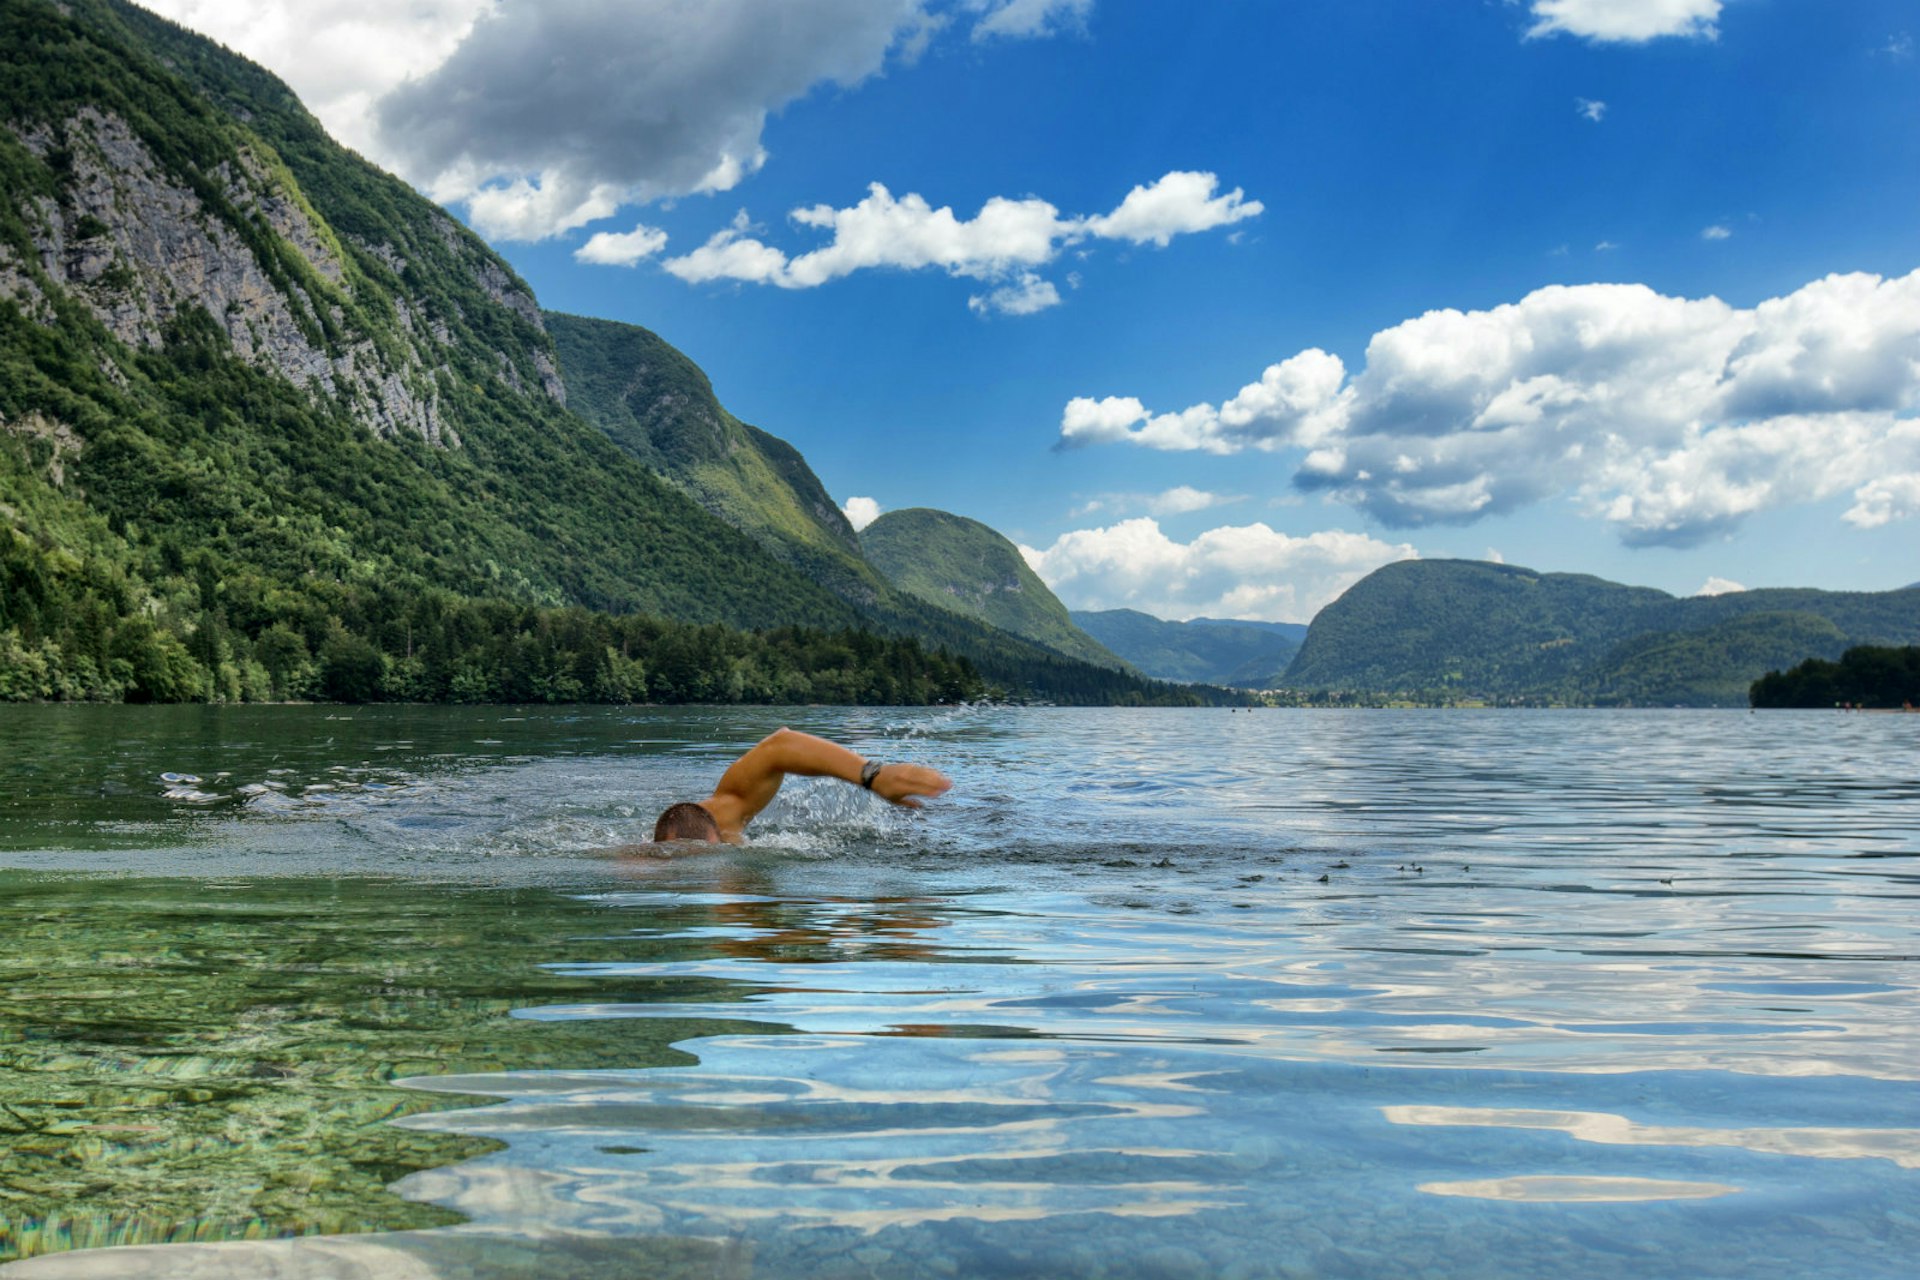 A man swims through the waters of Lake Bohinj, with mountains in the background and a cloudy blue sky overhead